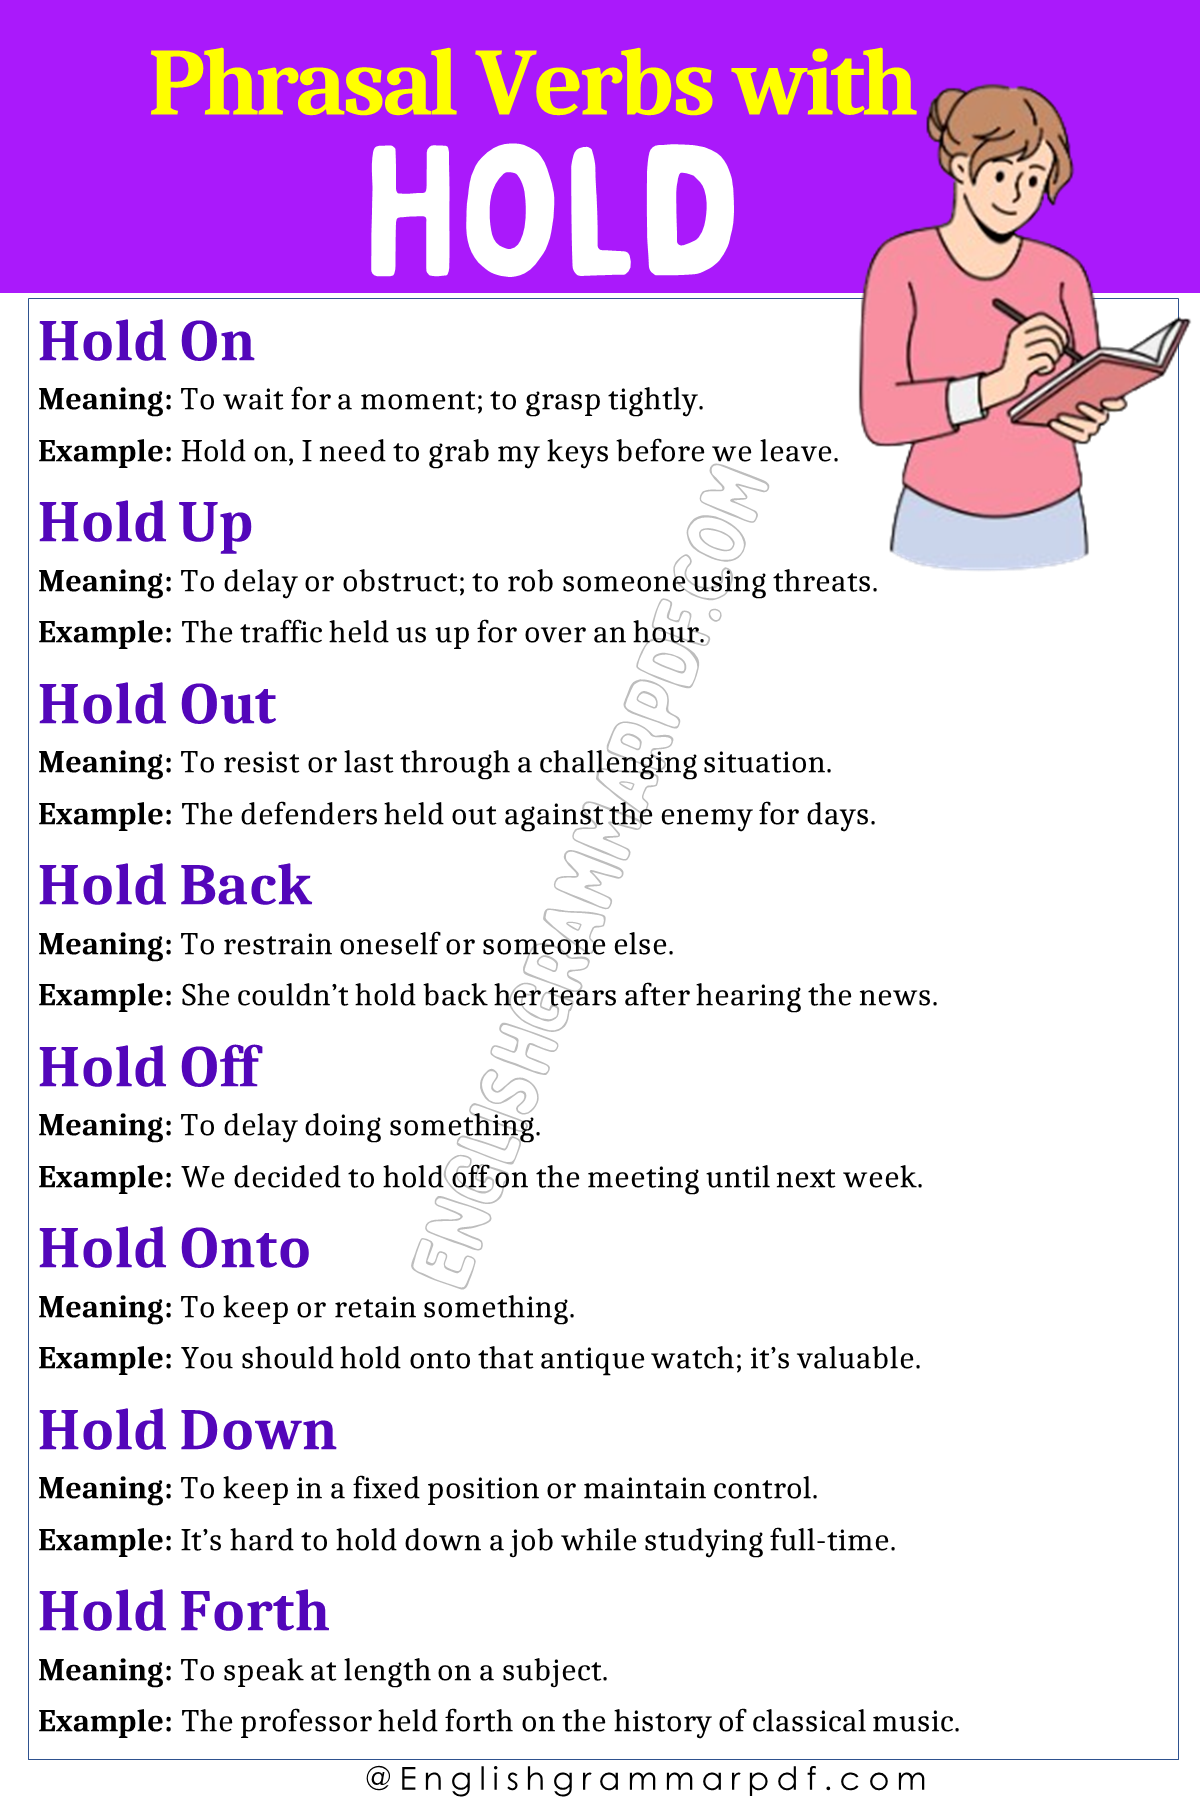 Phrasal Verbs with Hold